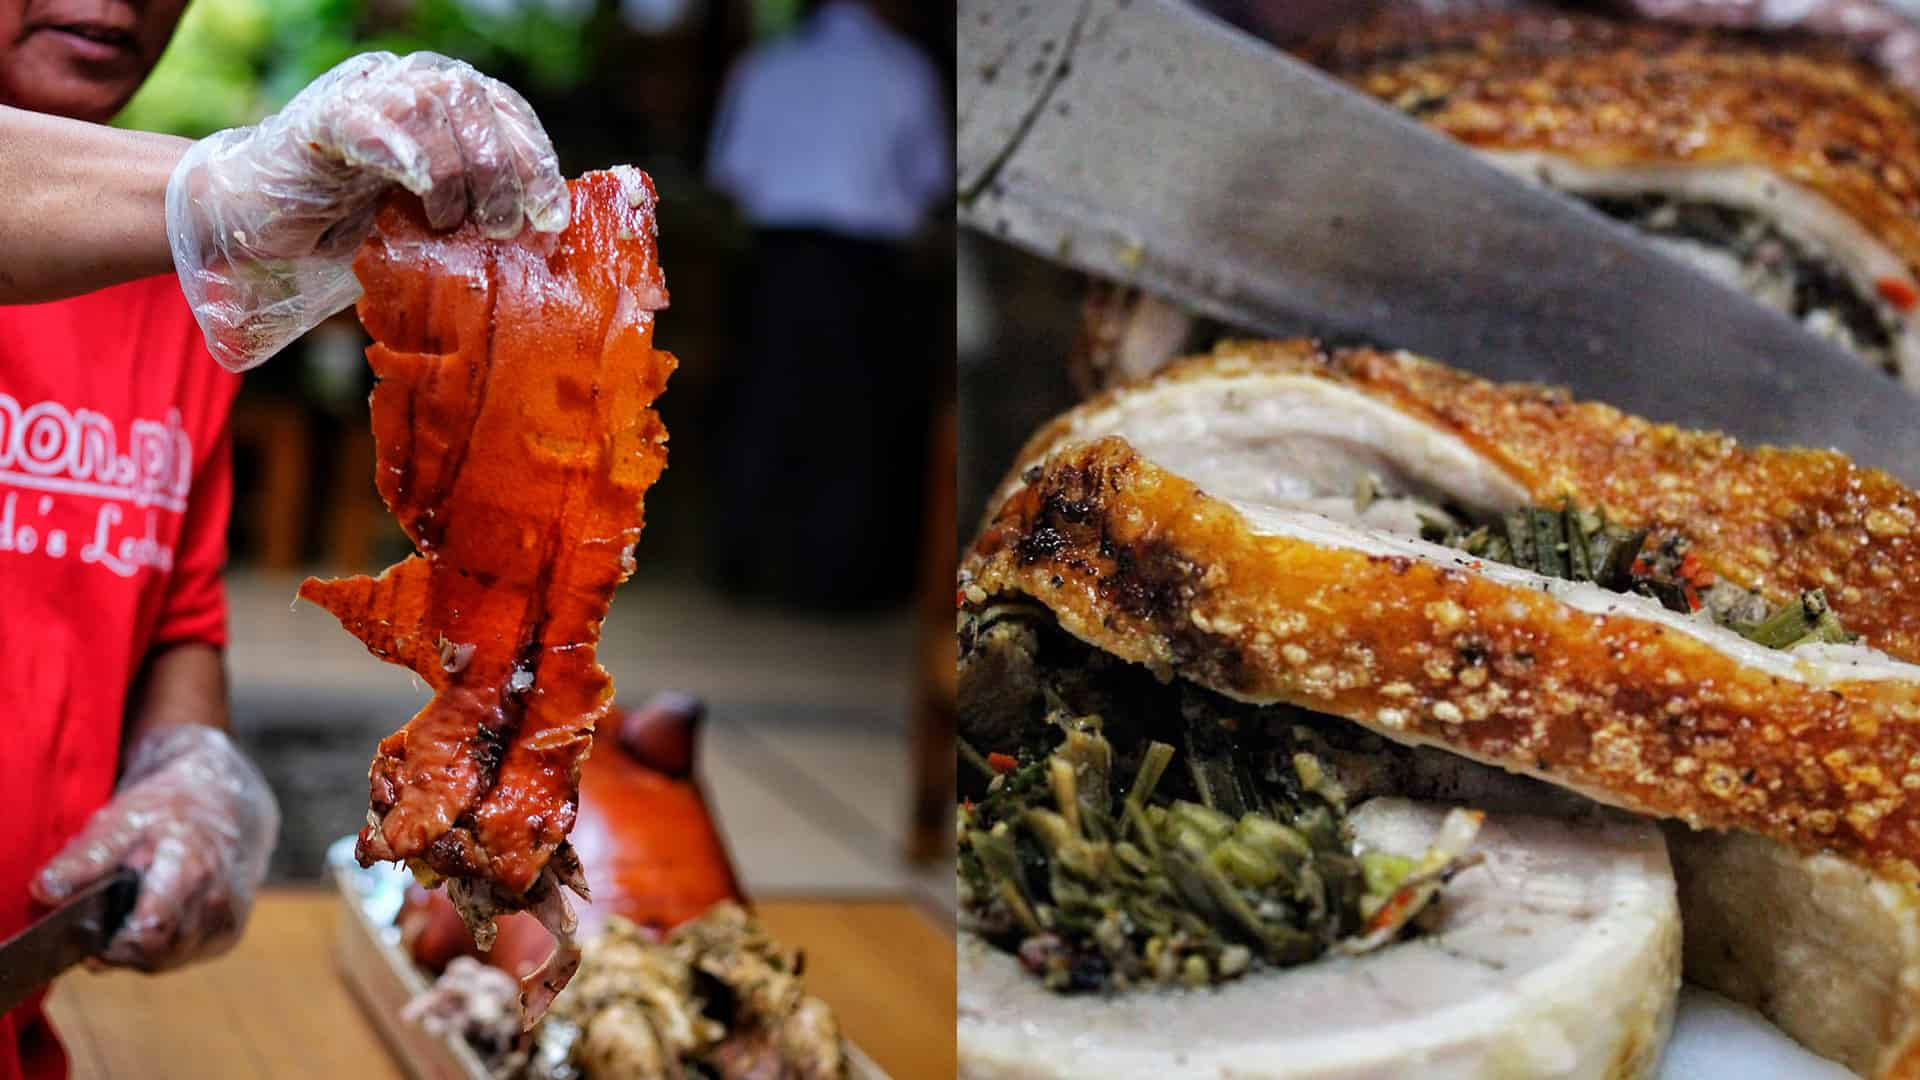 Feast your eyes on this mouthwatering Crispy Lechon Skin, a beloved delicacy in the Philippines. Wallpaper